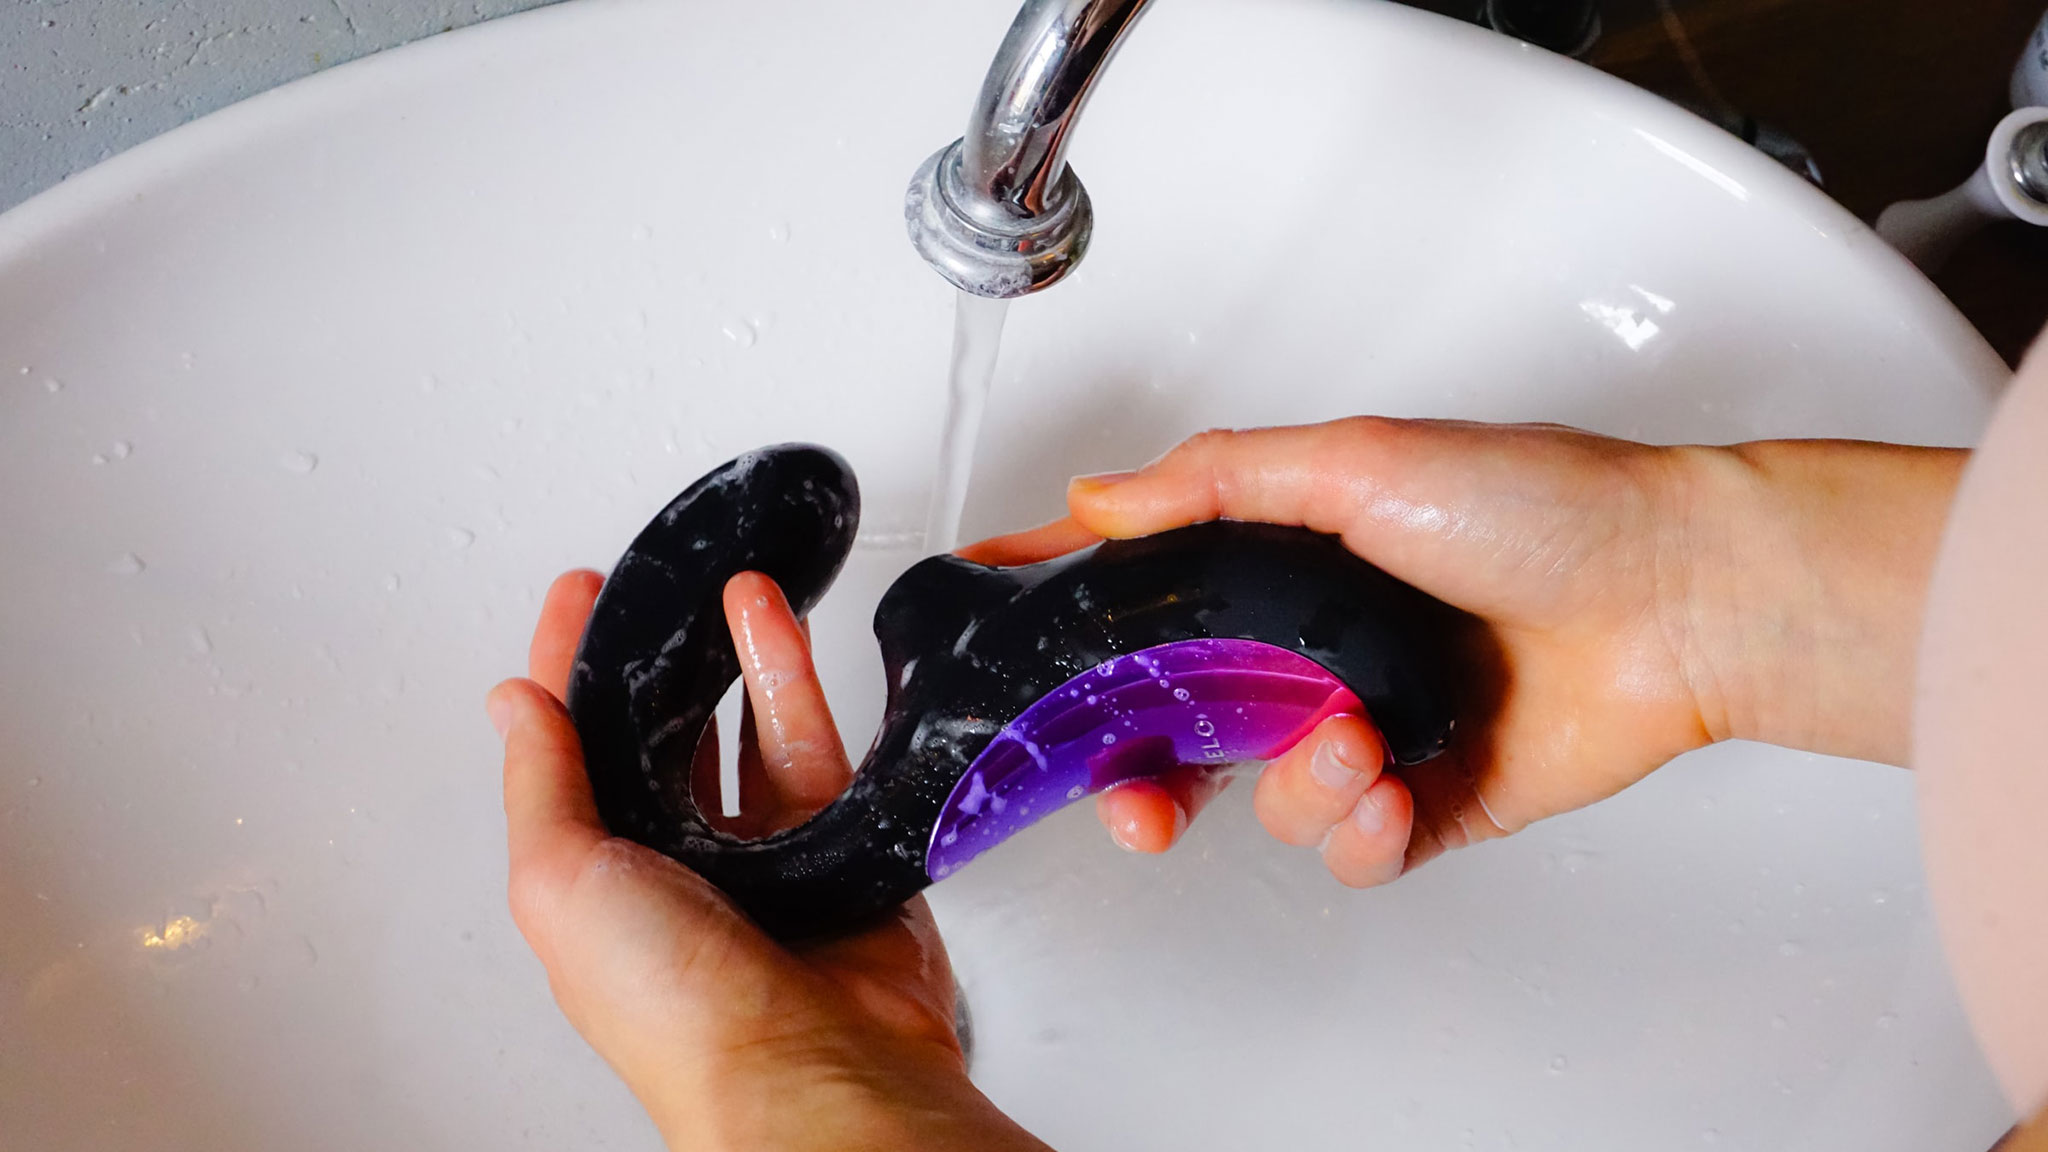 How to clean a dildo